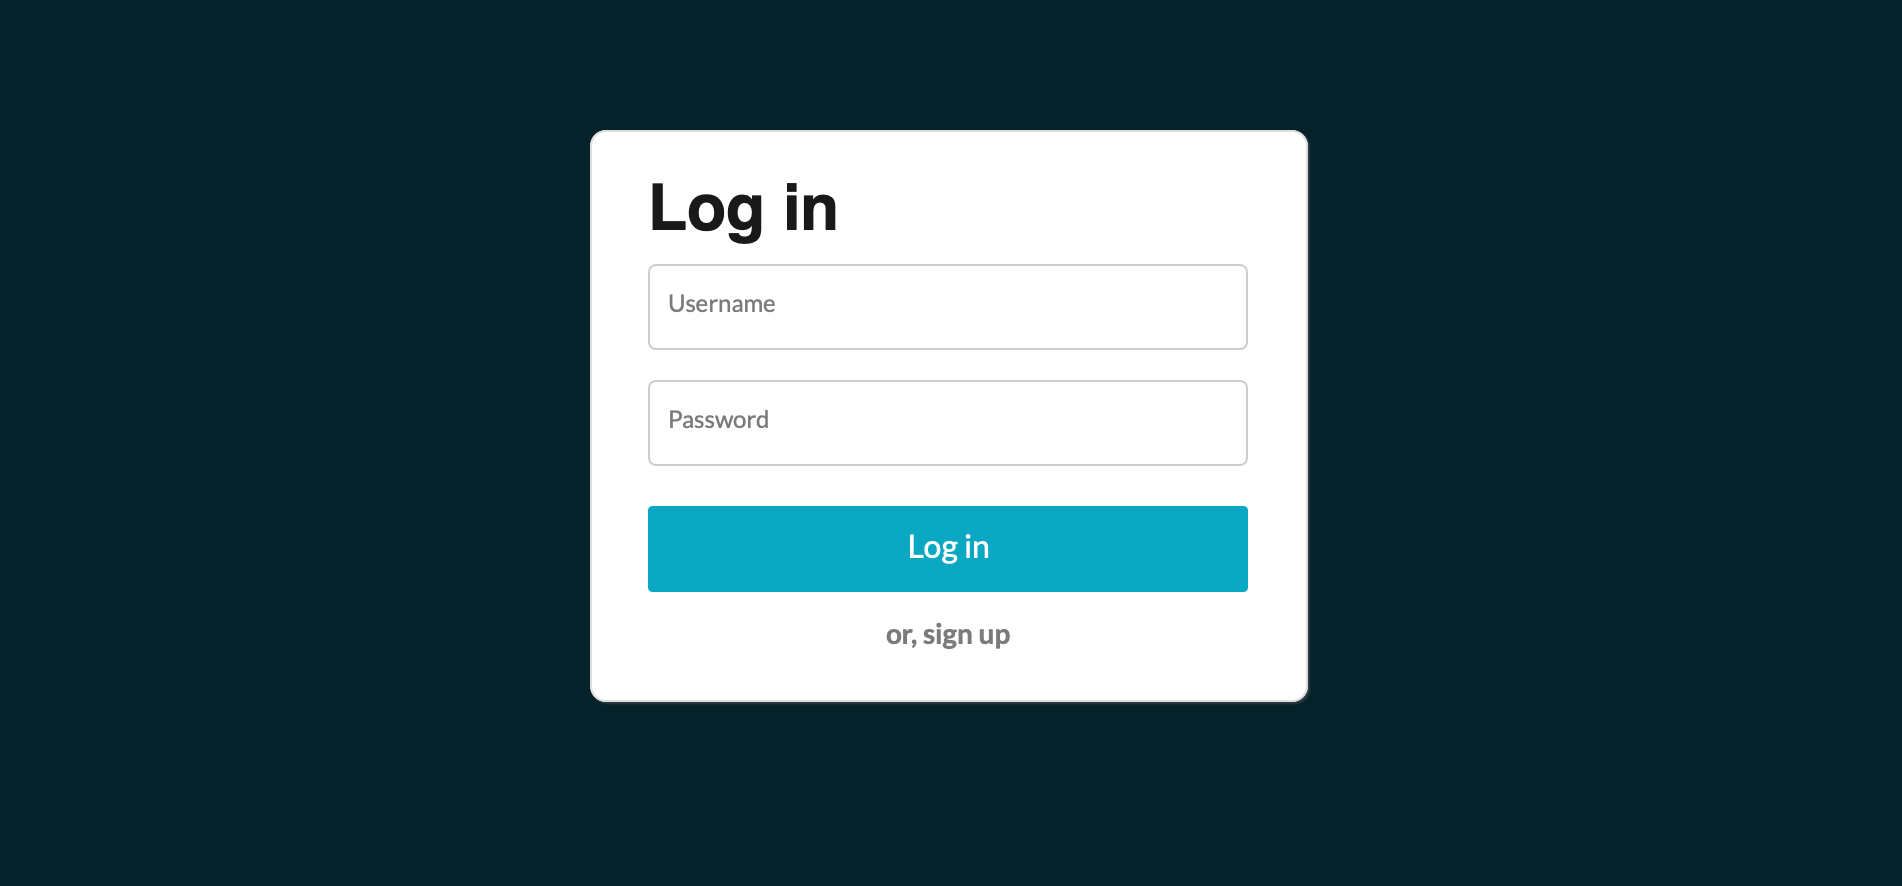 login - How to log into account? Do you need to set up